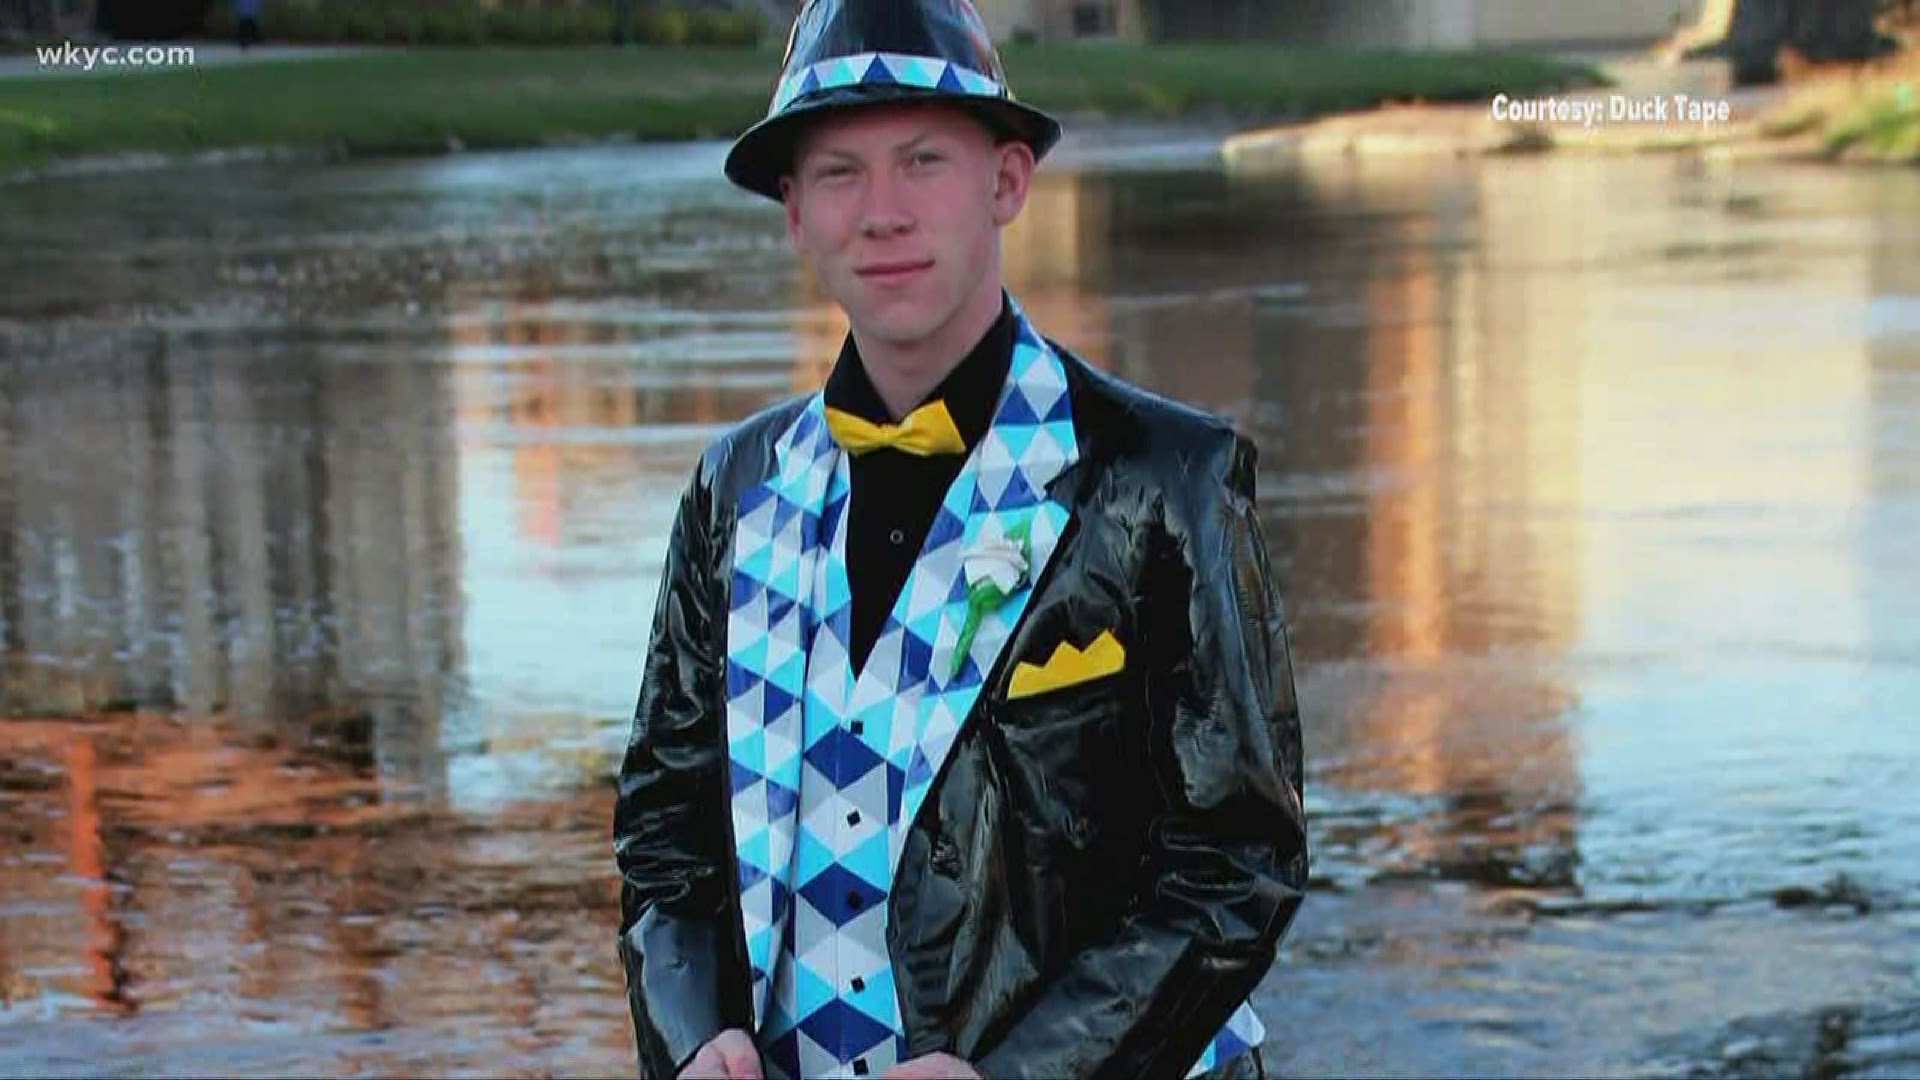 Duck Tape's Stuck at Prom competition is all virtual this year, offering teenagers a chance to build dress attire out of tape & win scholarships. Will Ujek reports.